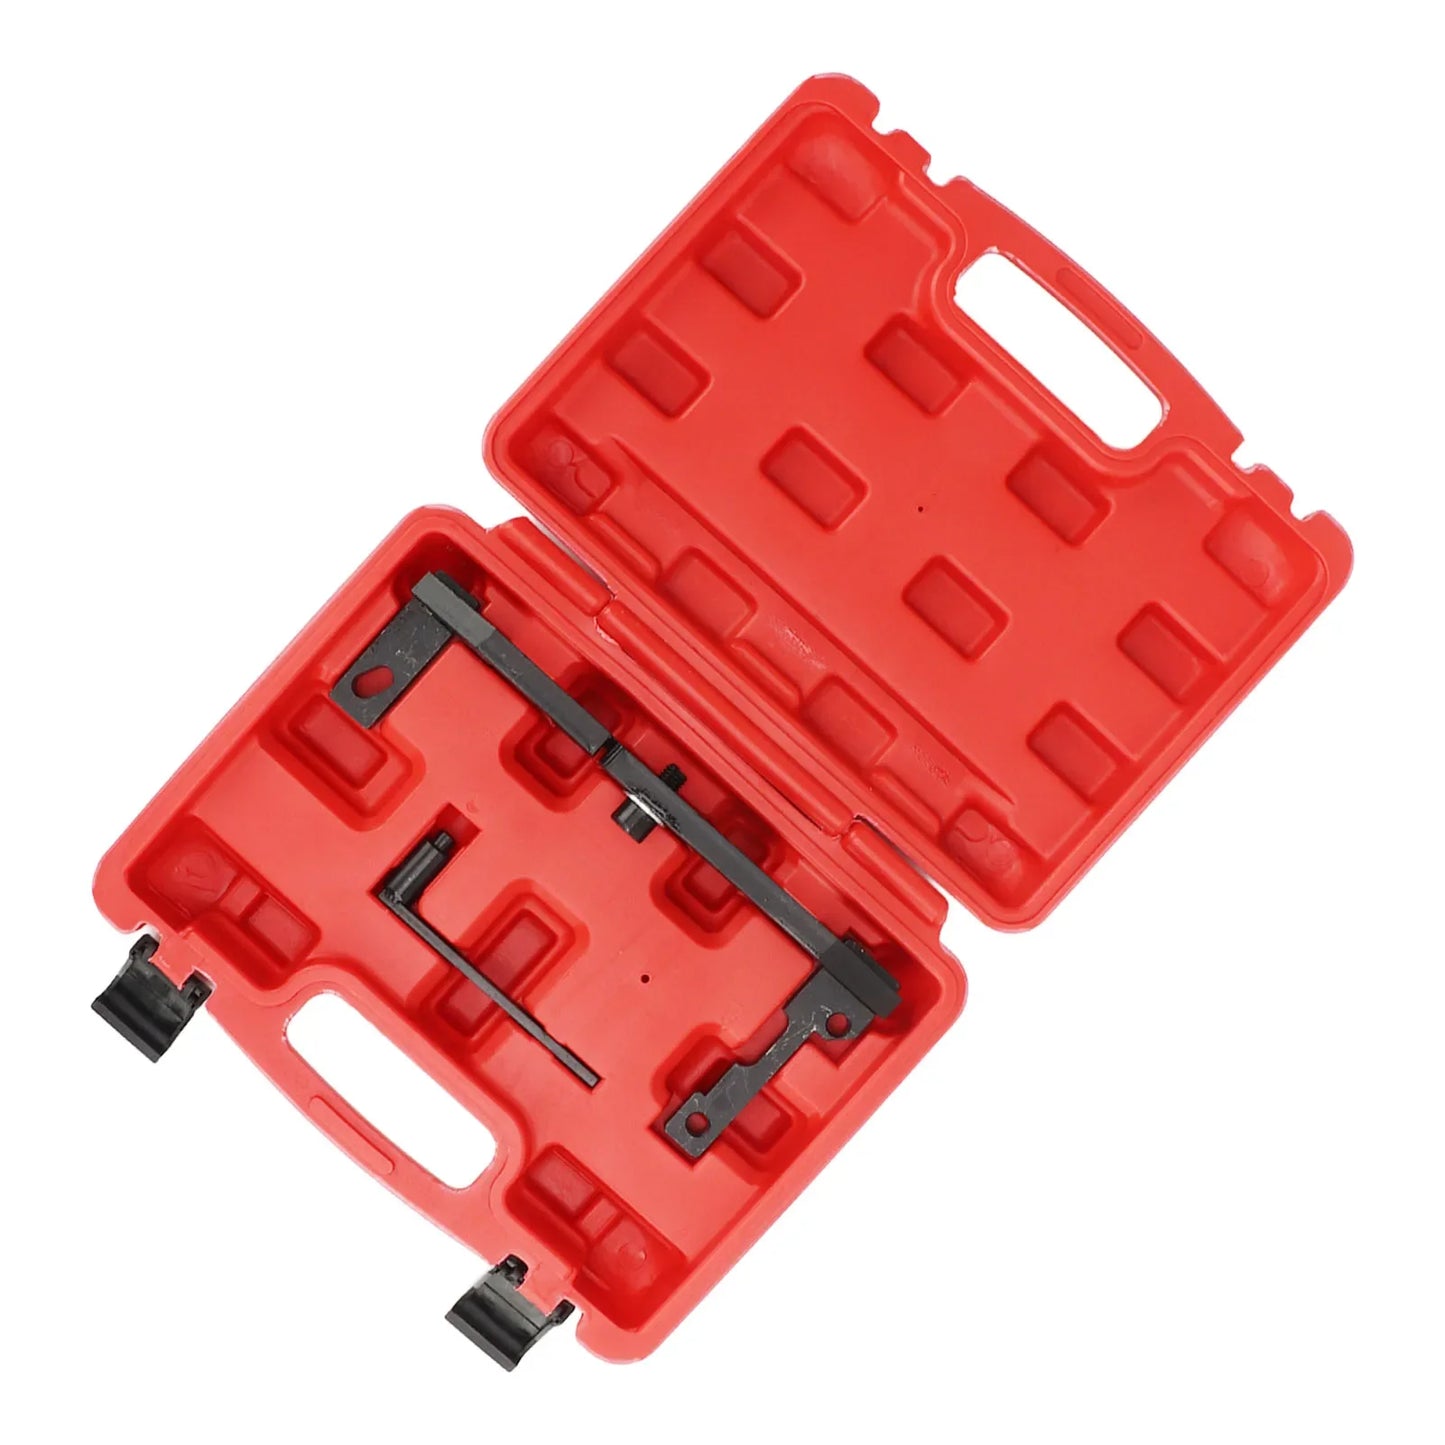 Engine Camshaft Tensioning Locking Alignment Timing Tool Kit 0109 2A Timing Belt Tool Replacement for Peugeot 108 208